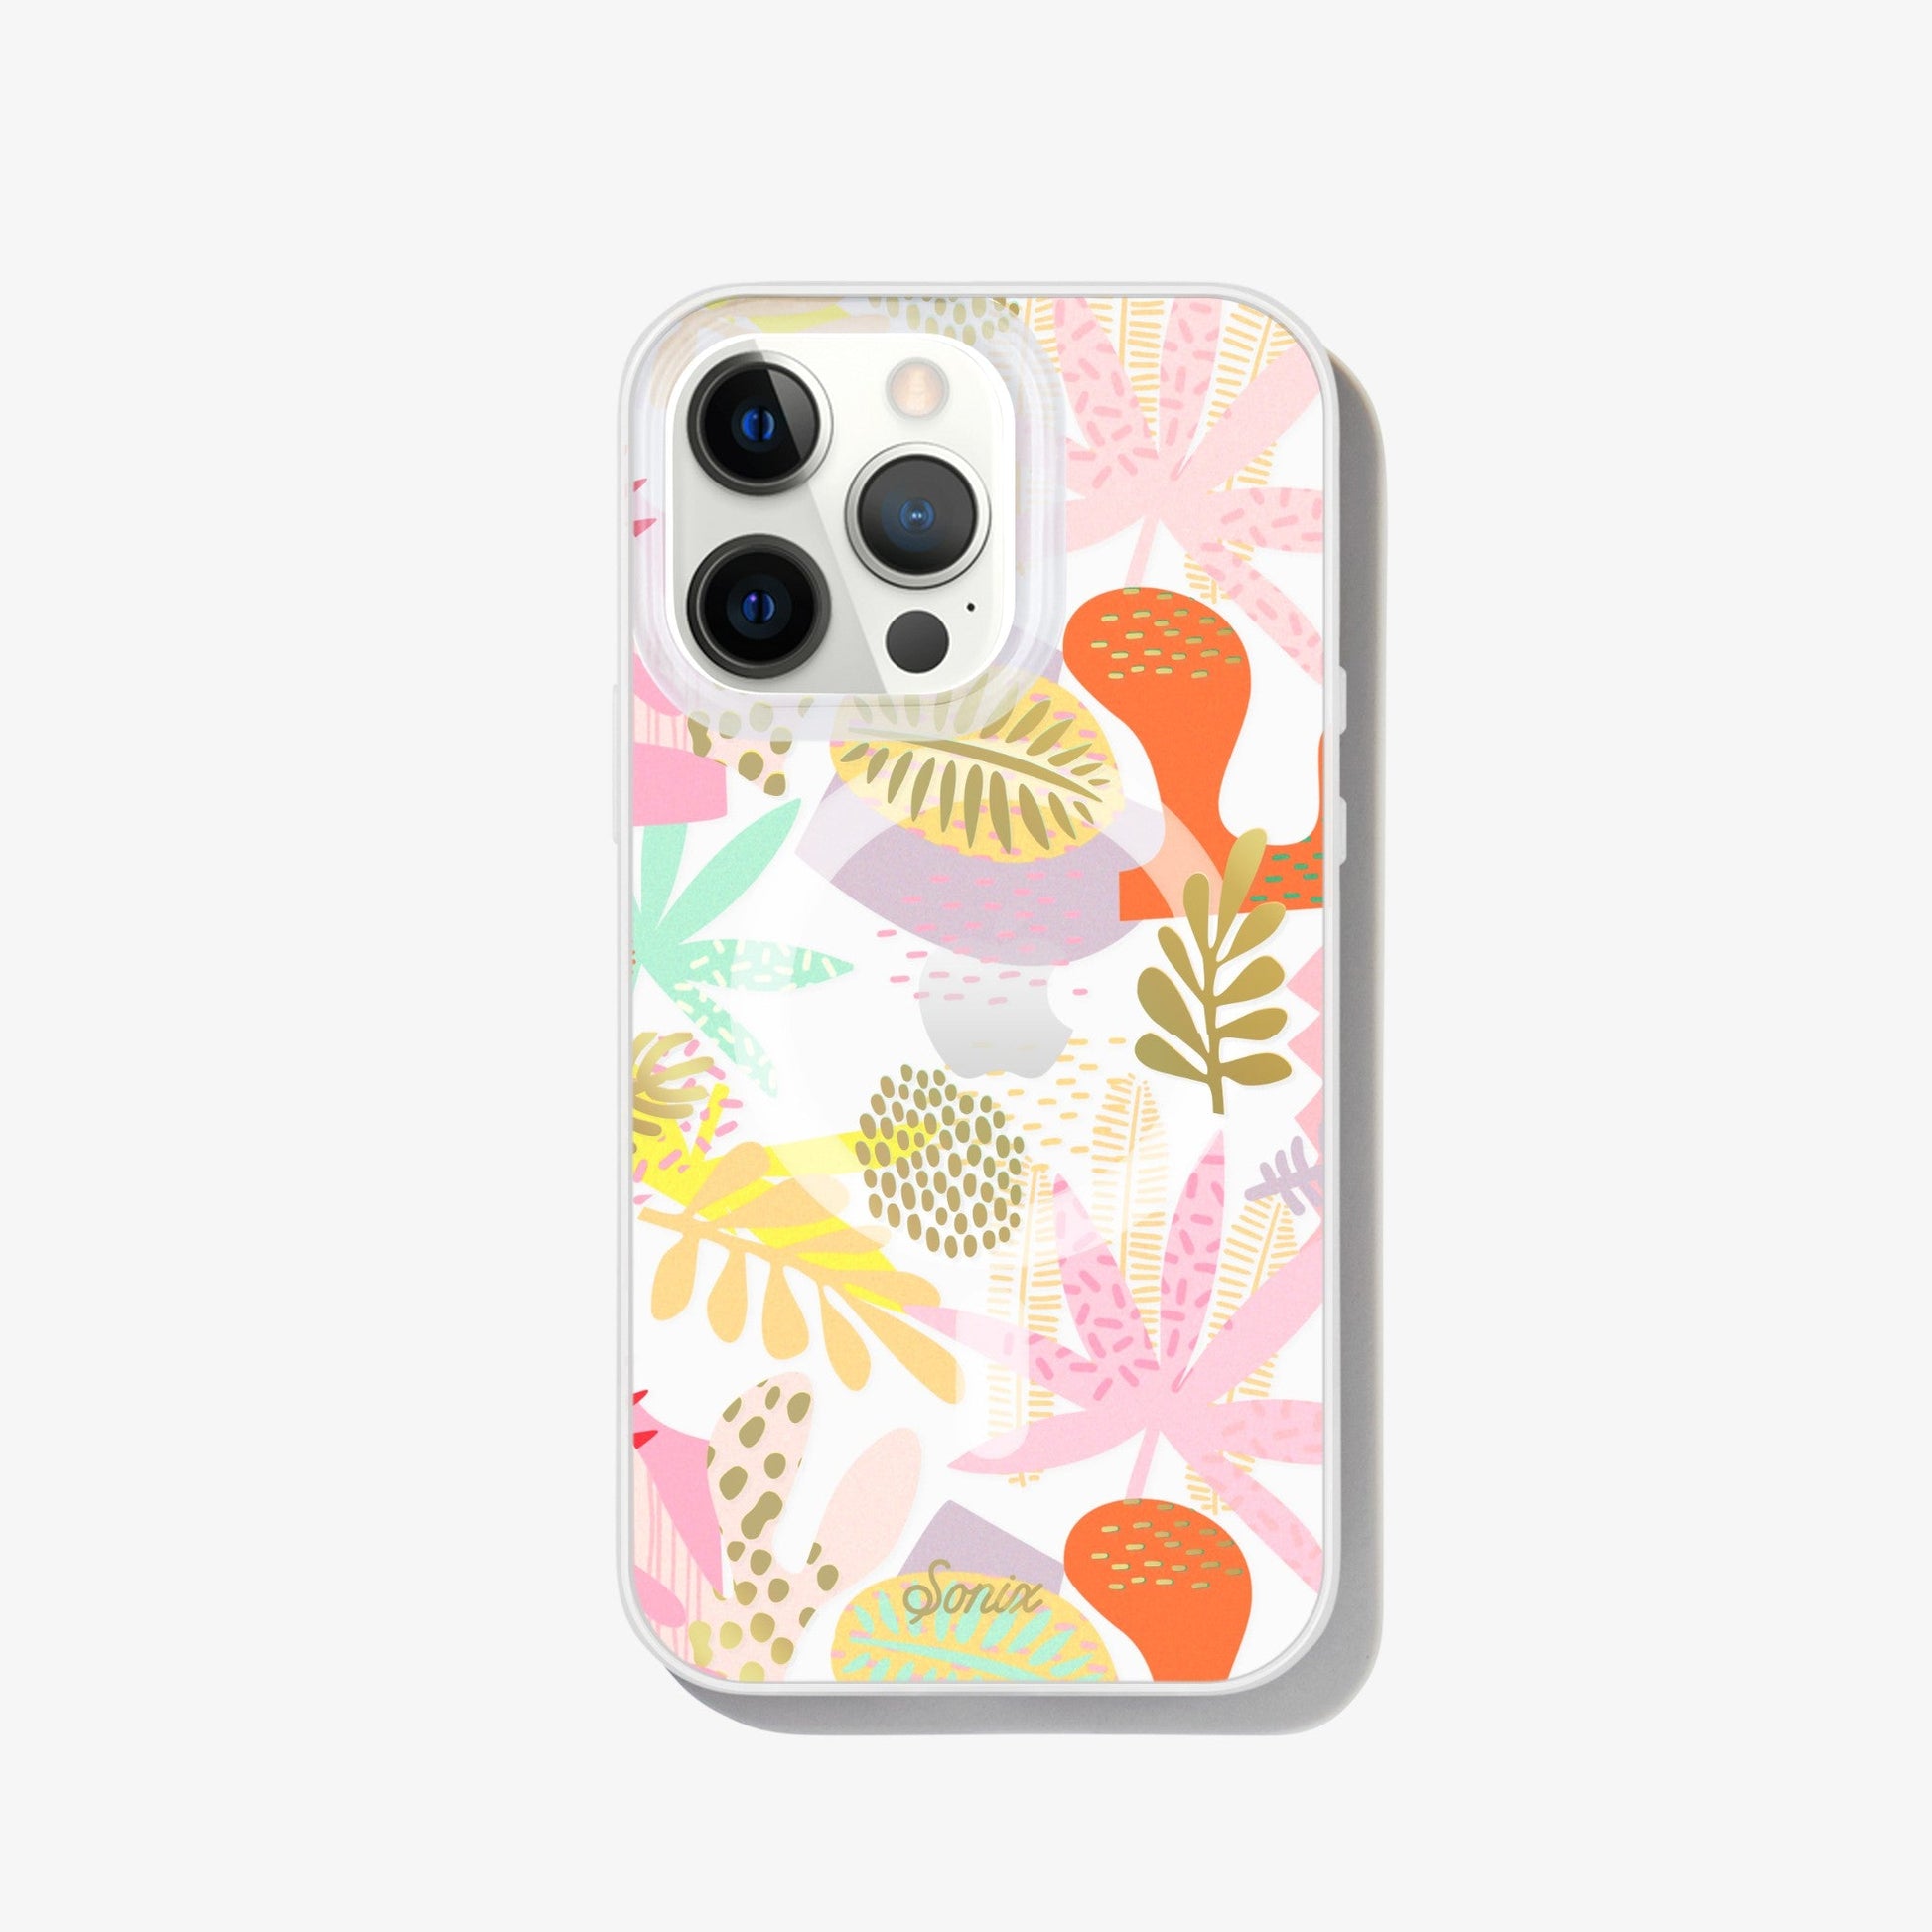 a collection of earthy shapes and forms, like plants and flowers to create a composition of playful abstract art with gold foil details shown on an iphone 13 pro